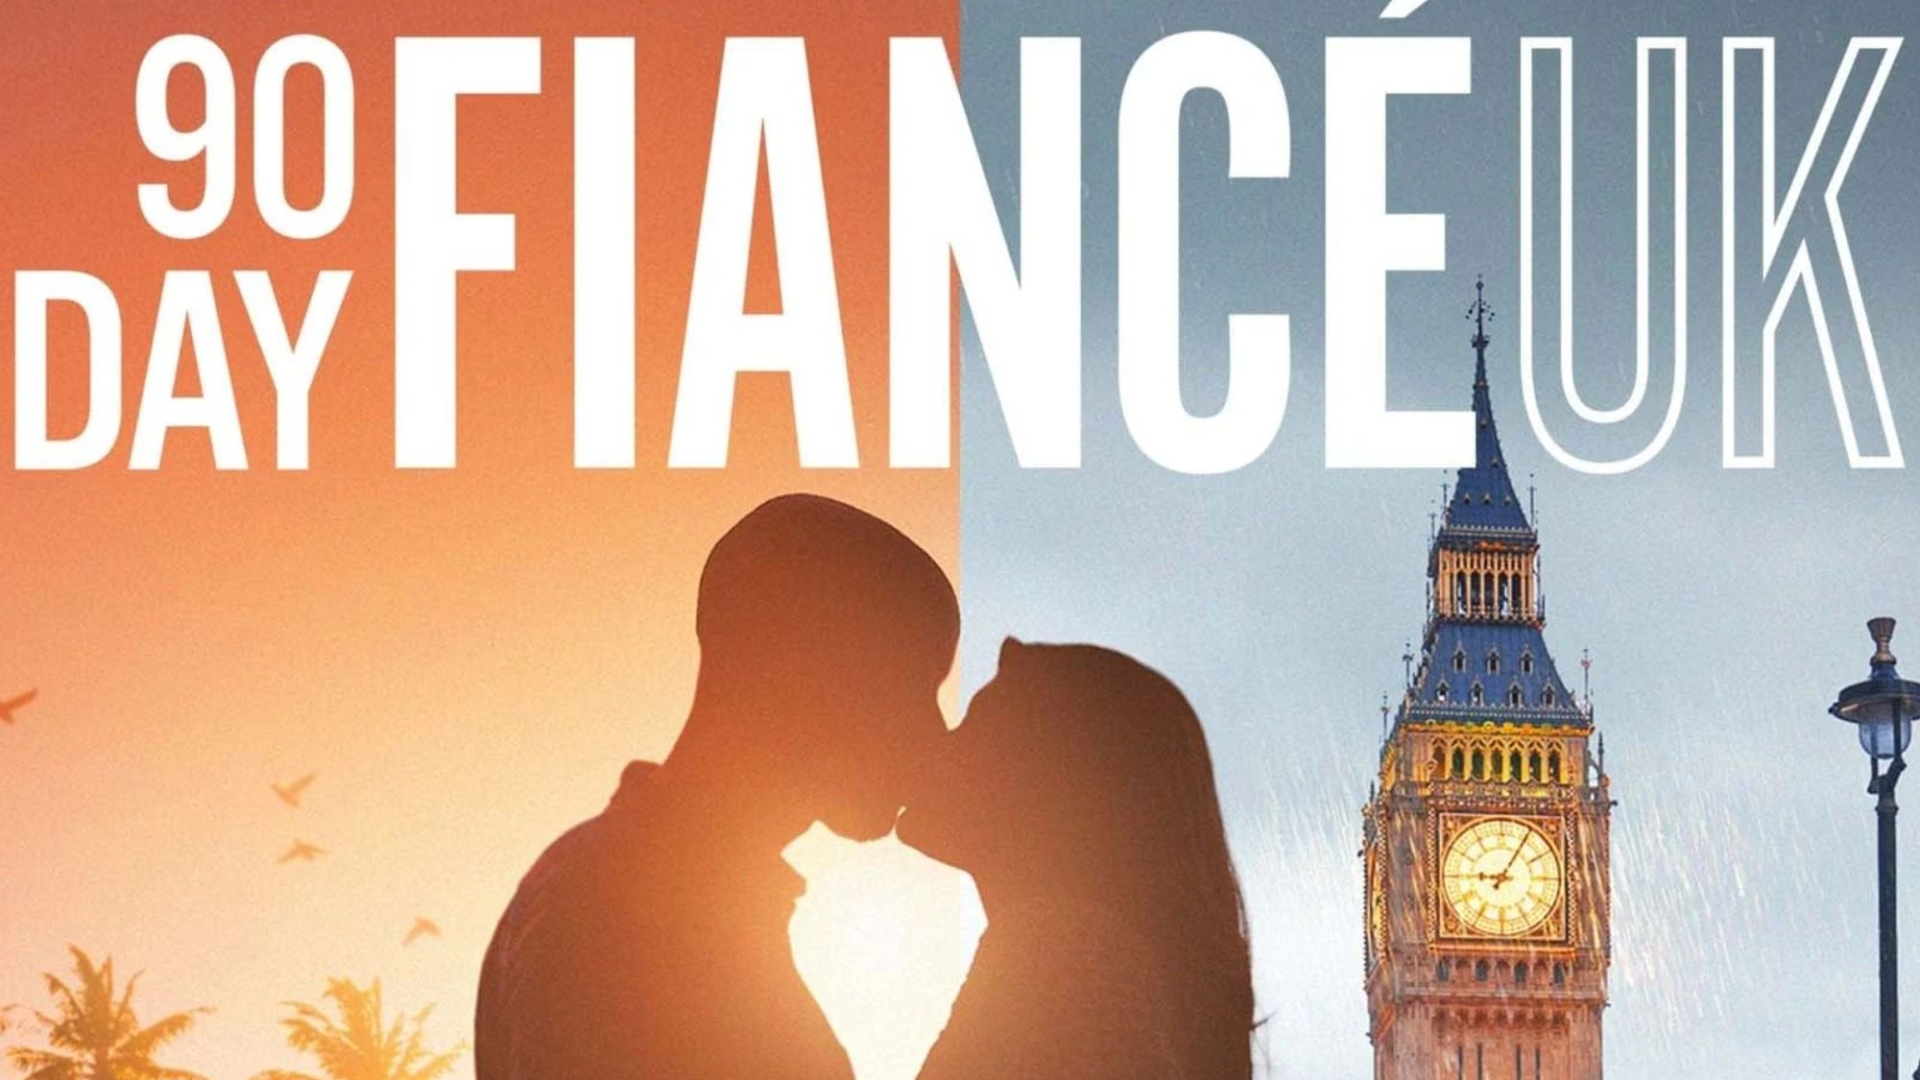 The full line-up of 90 Day fiance UK Series 2 return dates has been confirmed